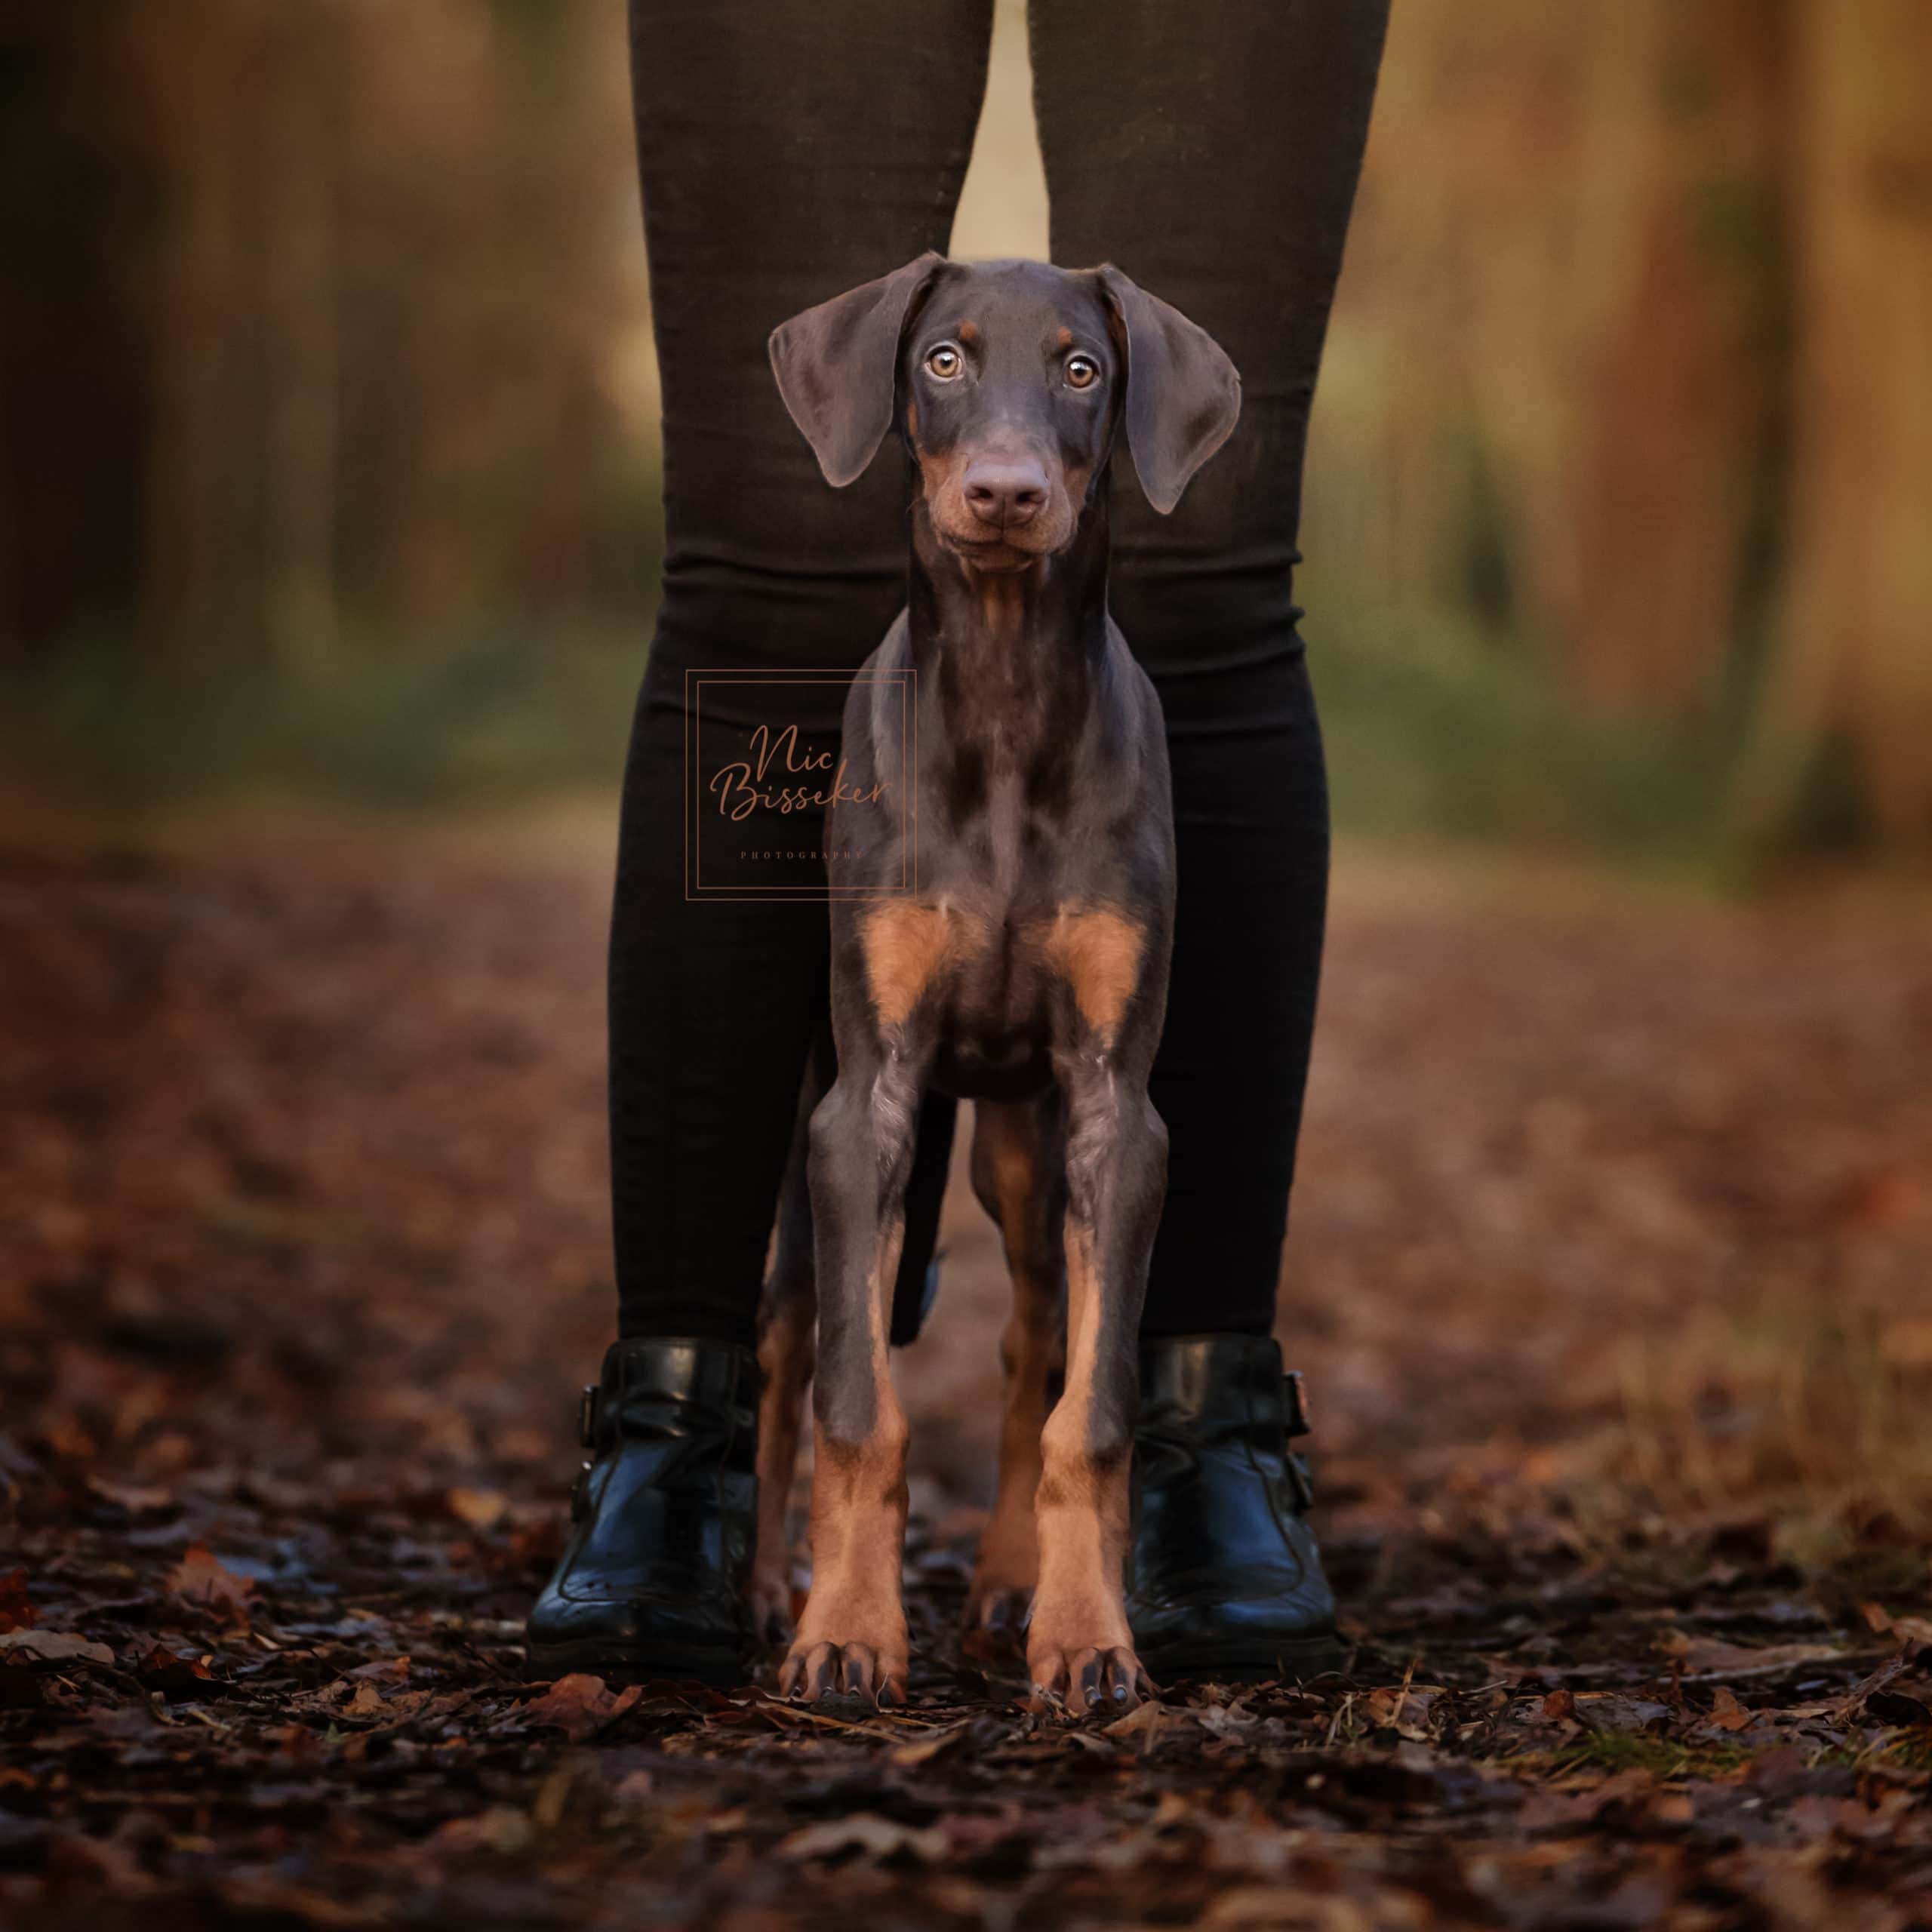 Nic Bisseker Photography dog photoshoot gift vouchers West sussex